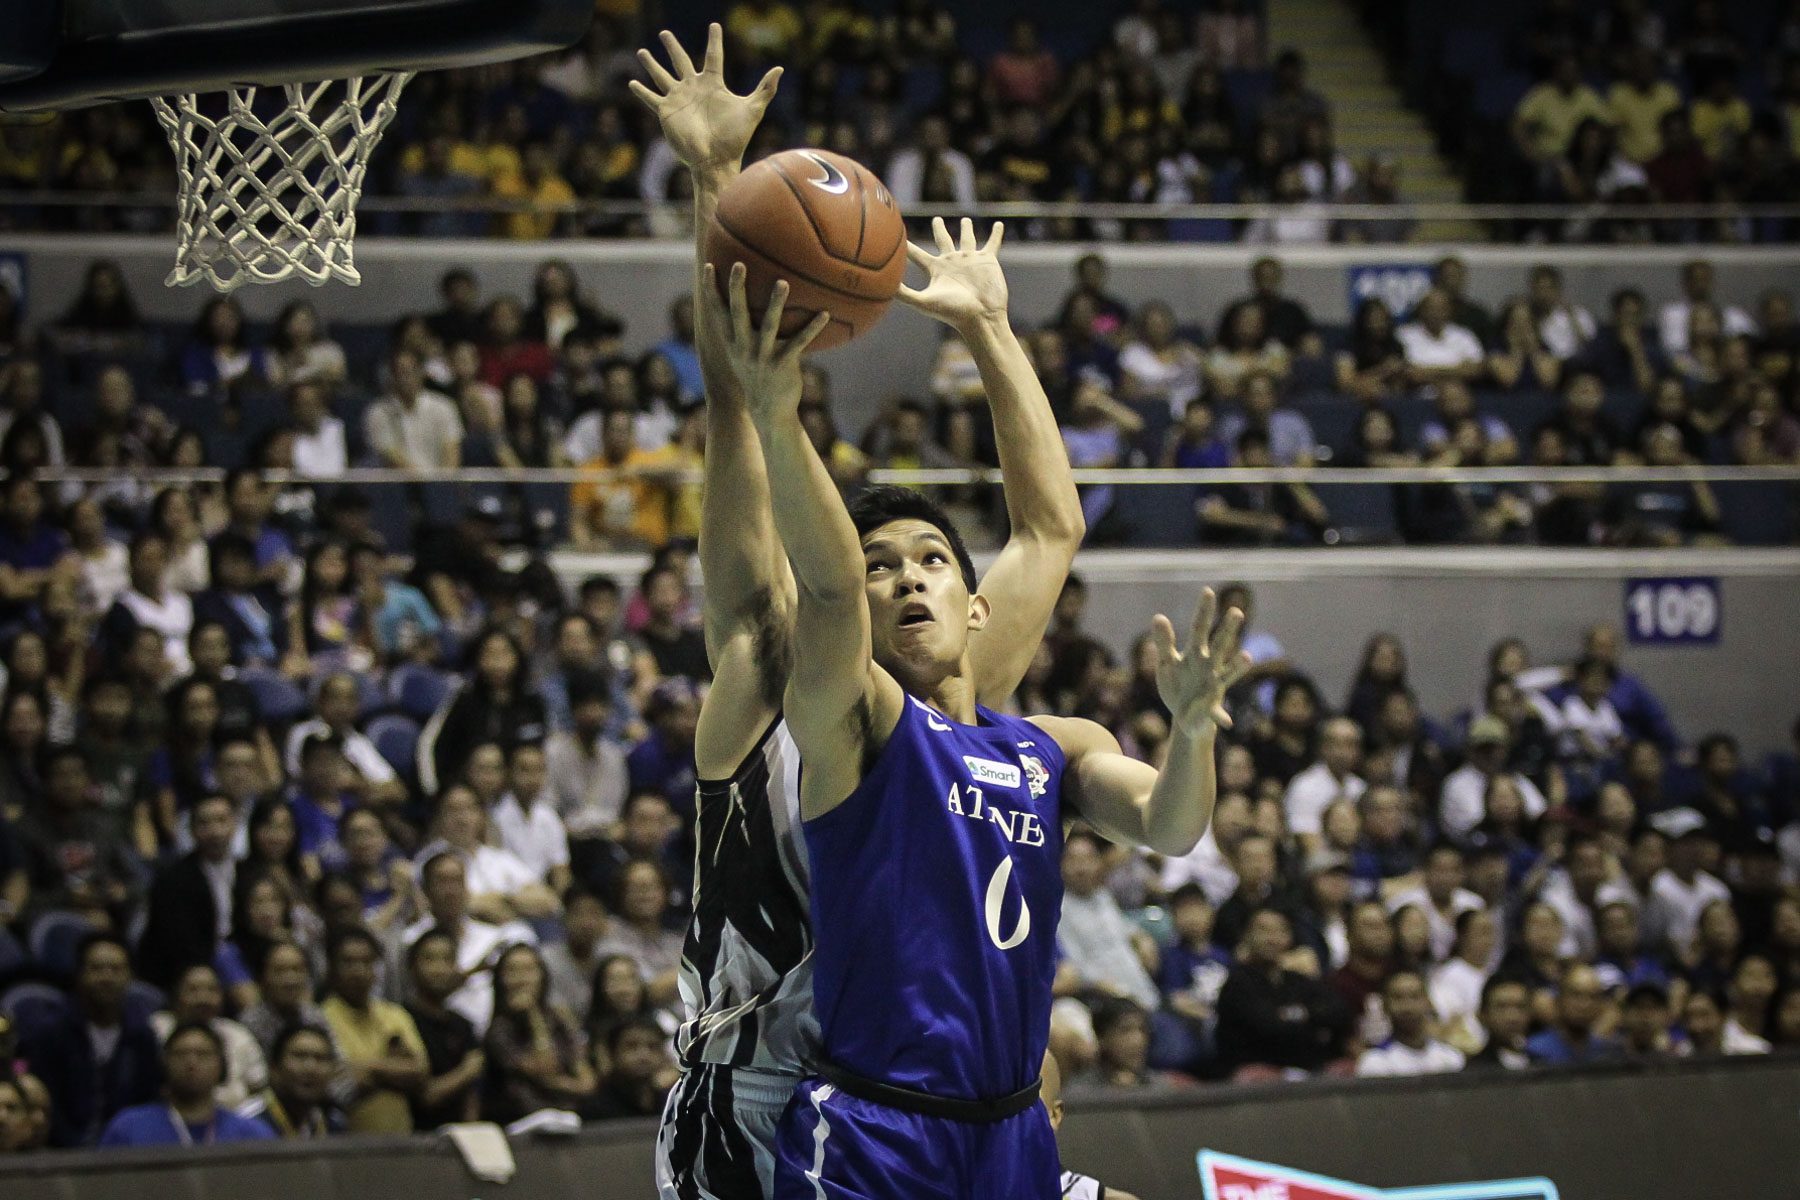 Host school UST ends season with another loss to Ateneo